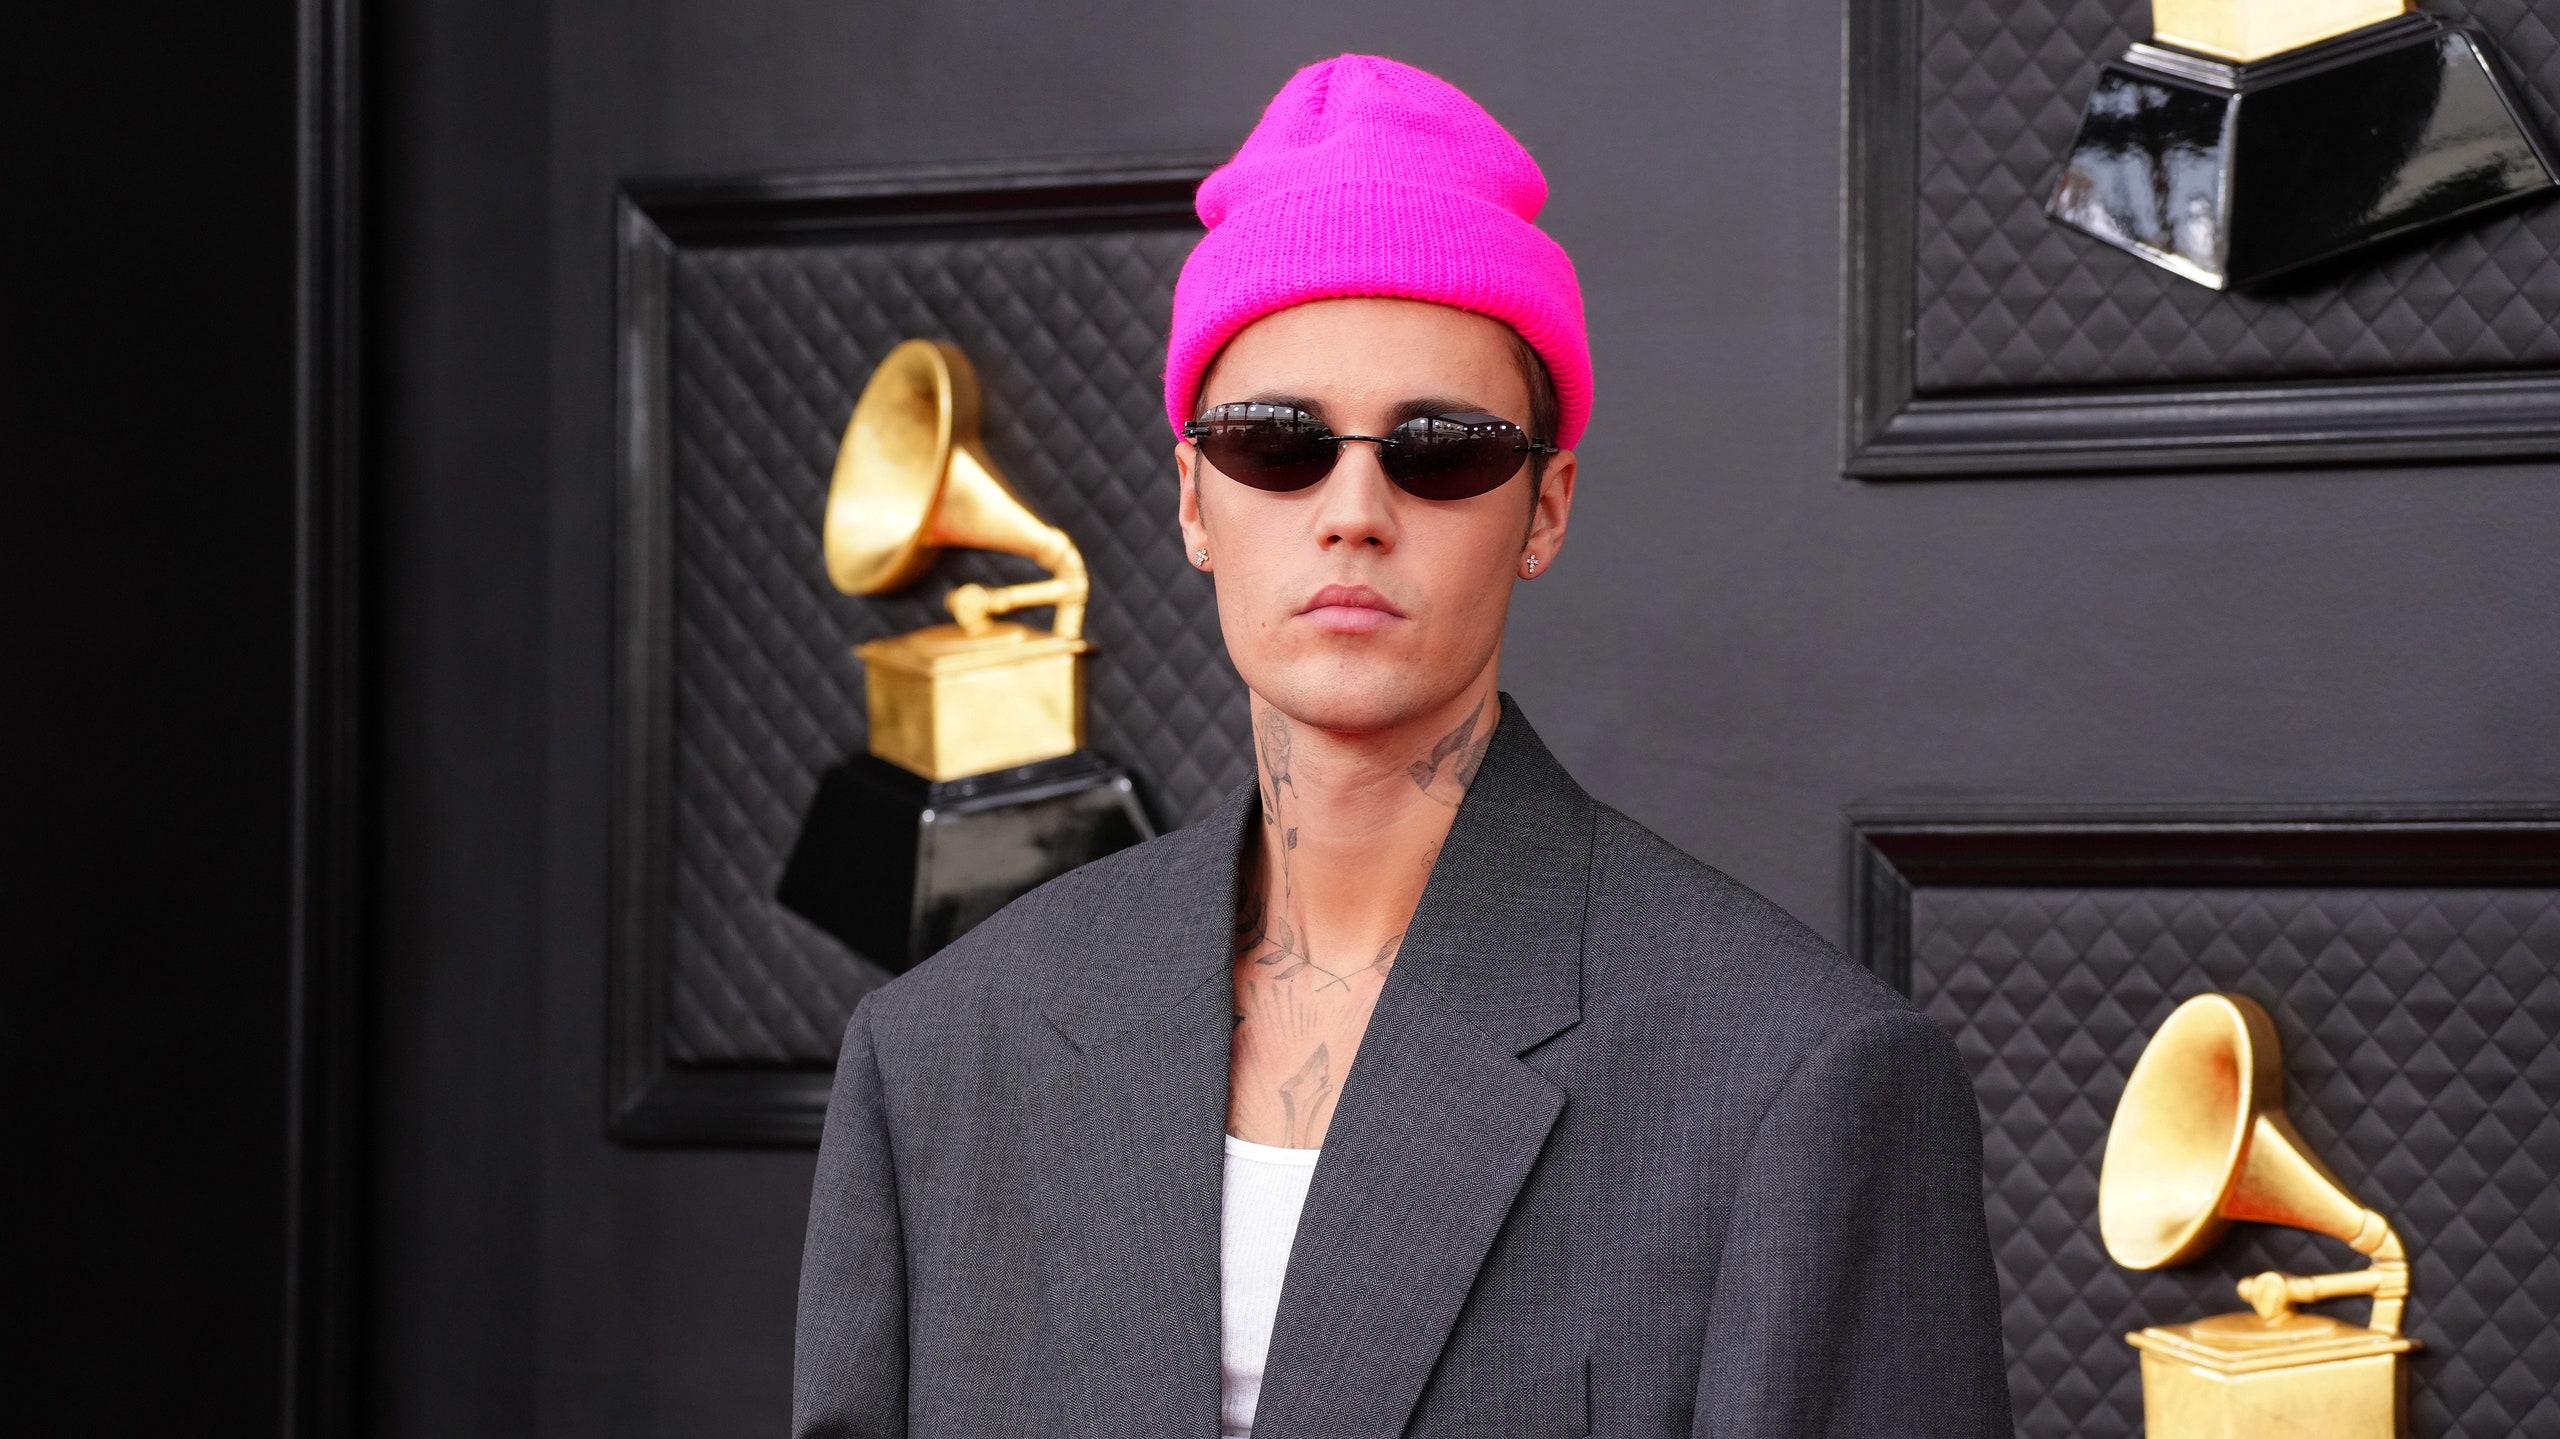 Free download Justin Biebers Massive Grammys Suit Took the Big Fit